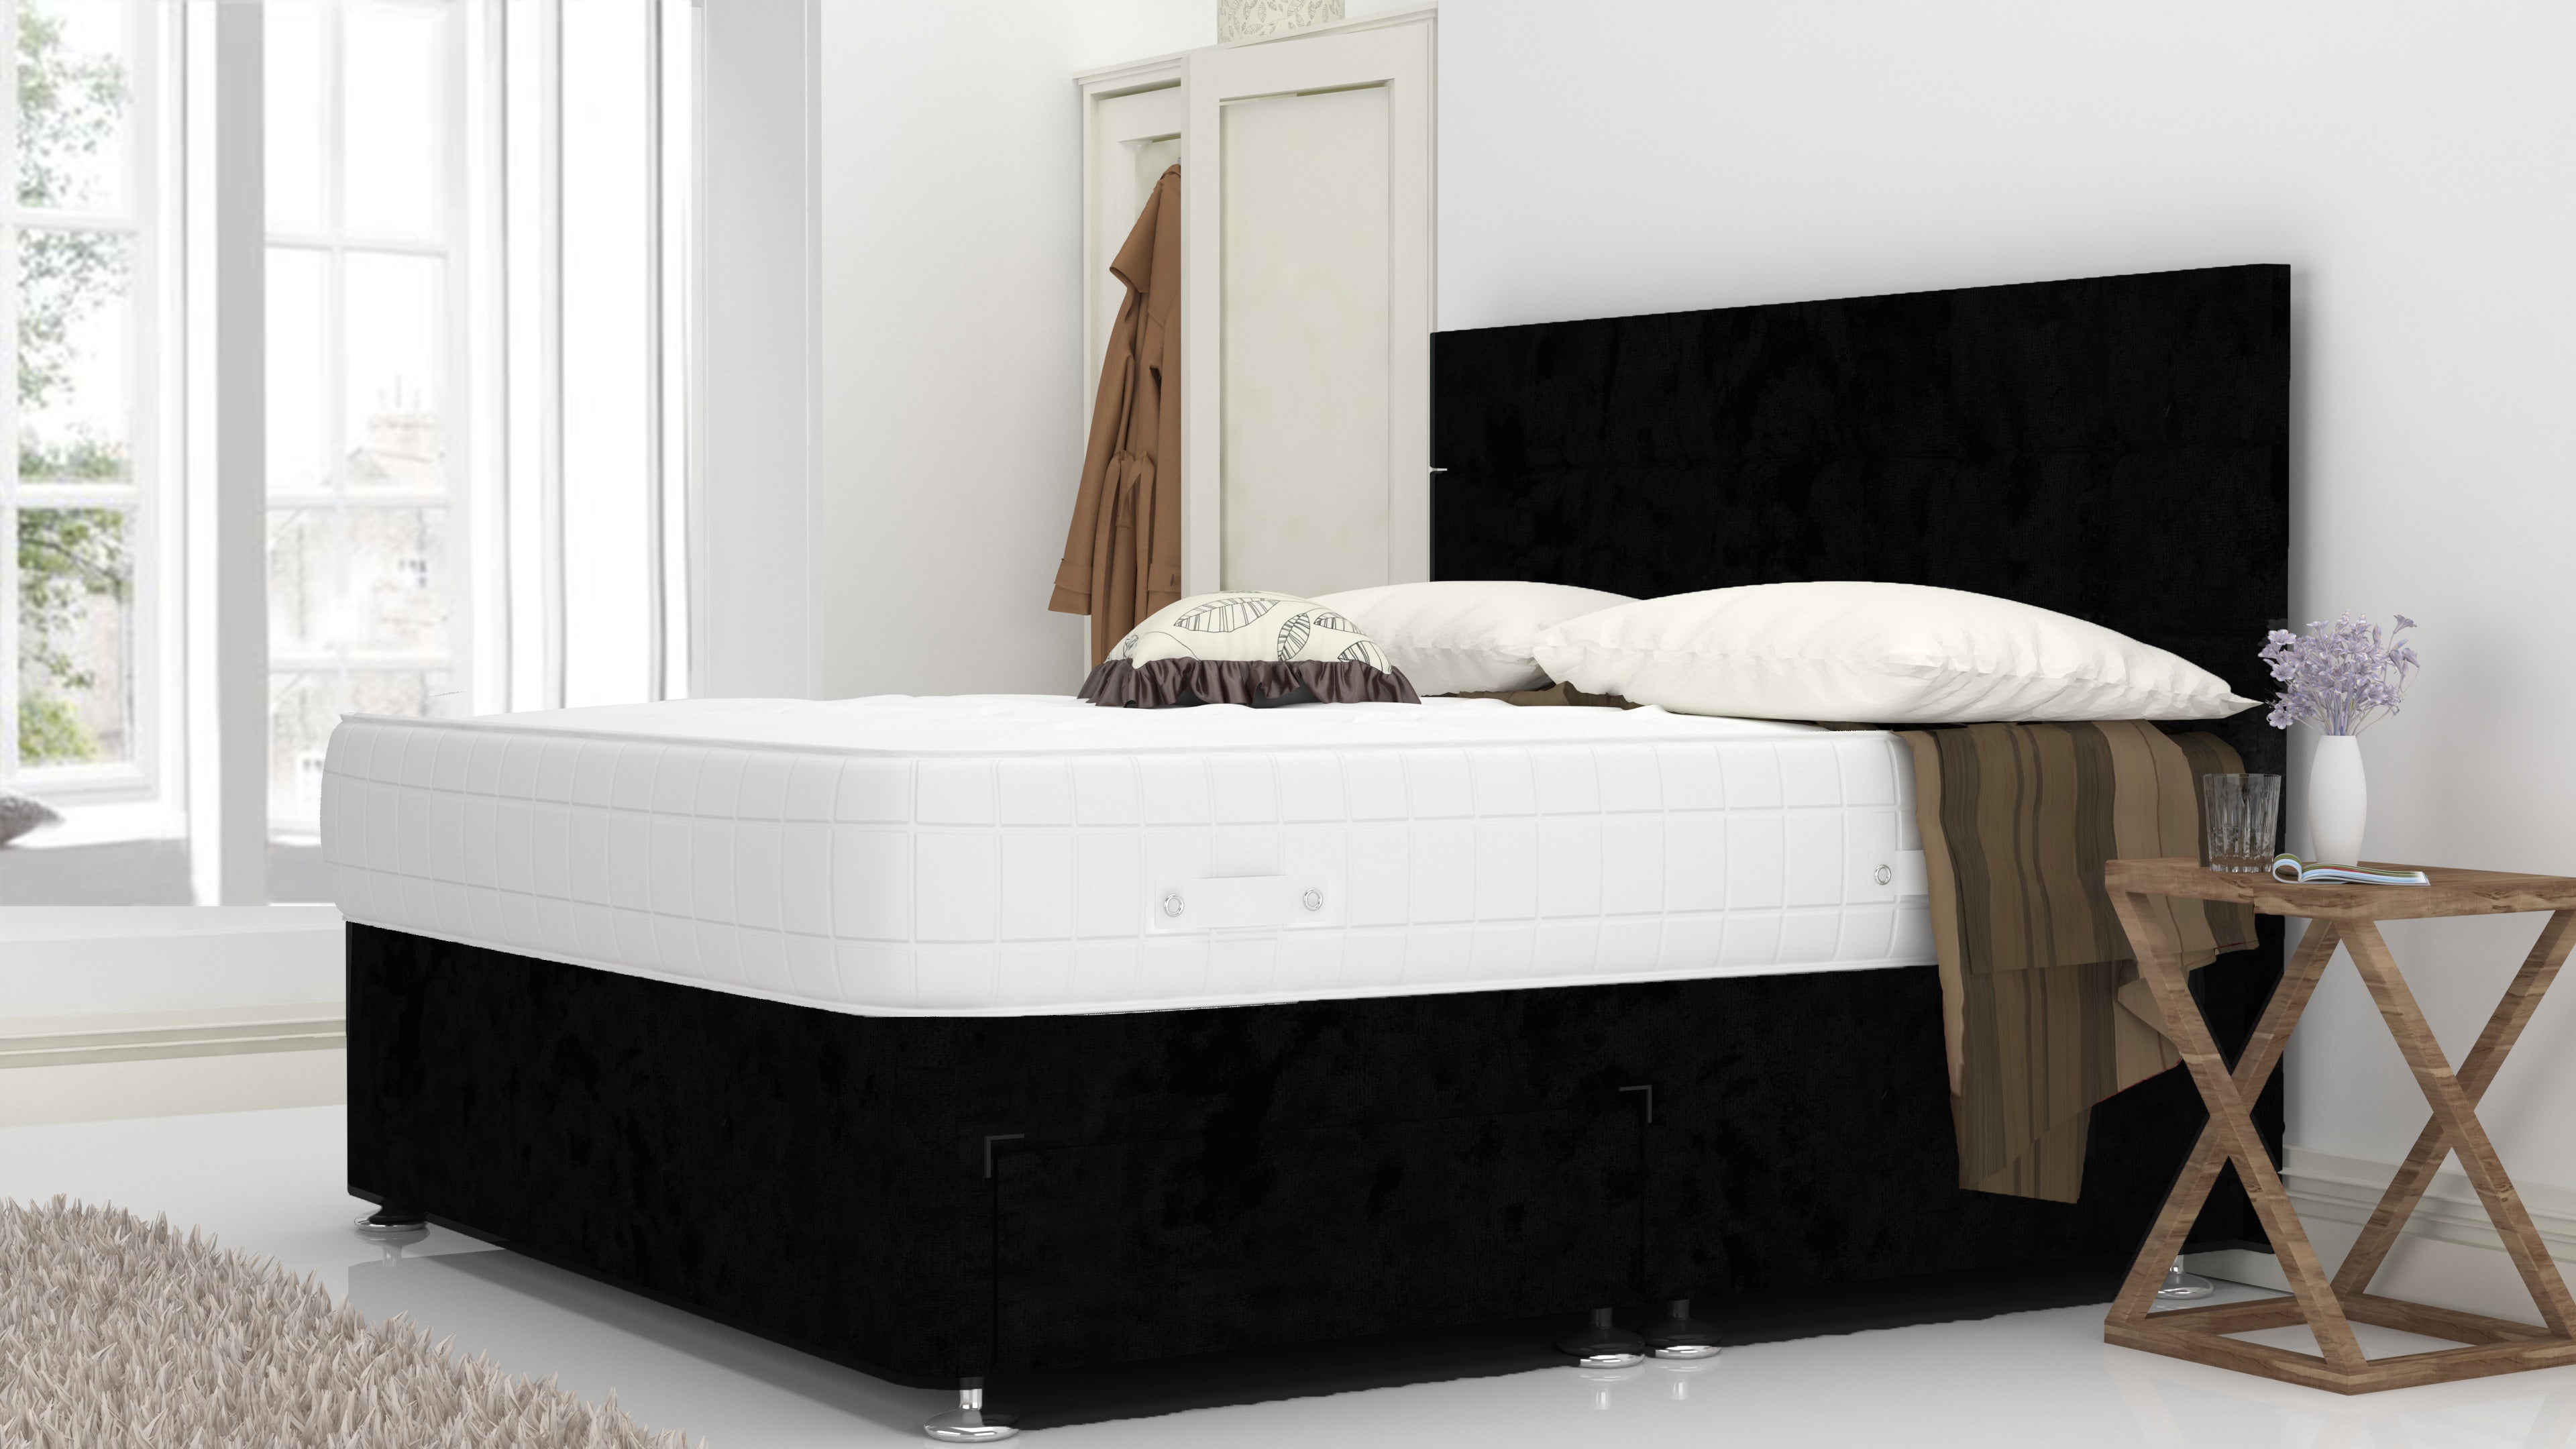 Black Crushed 6 Feet Divan Bed Set With Cube Headboard (Included Feet) And Free Orthopedic Mattress